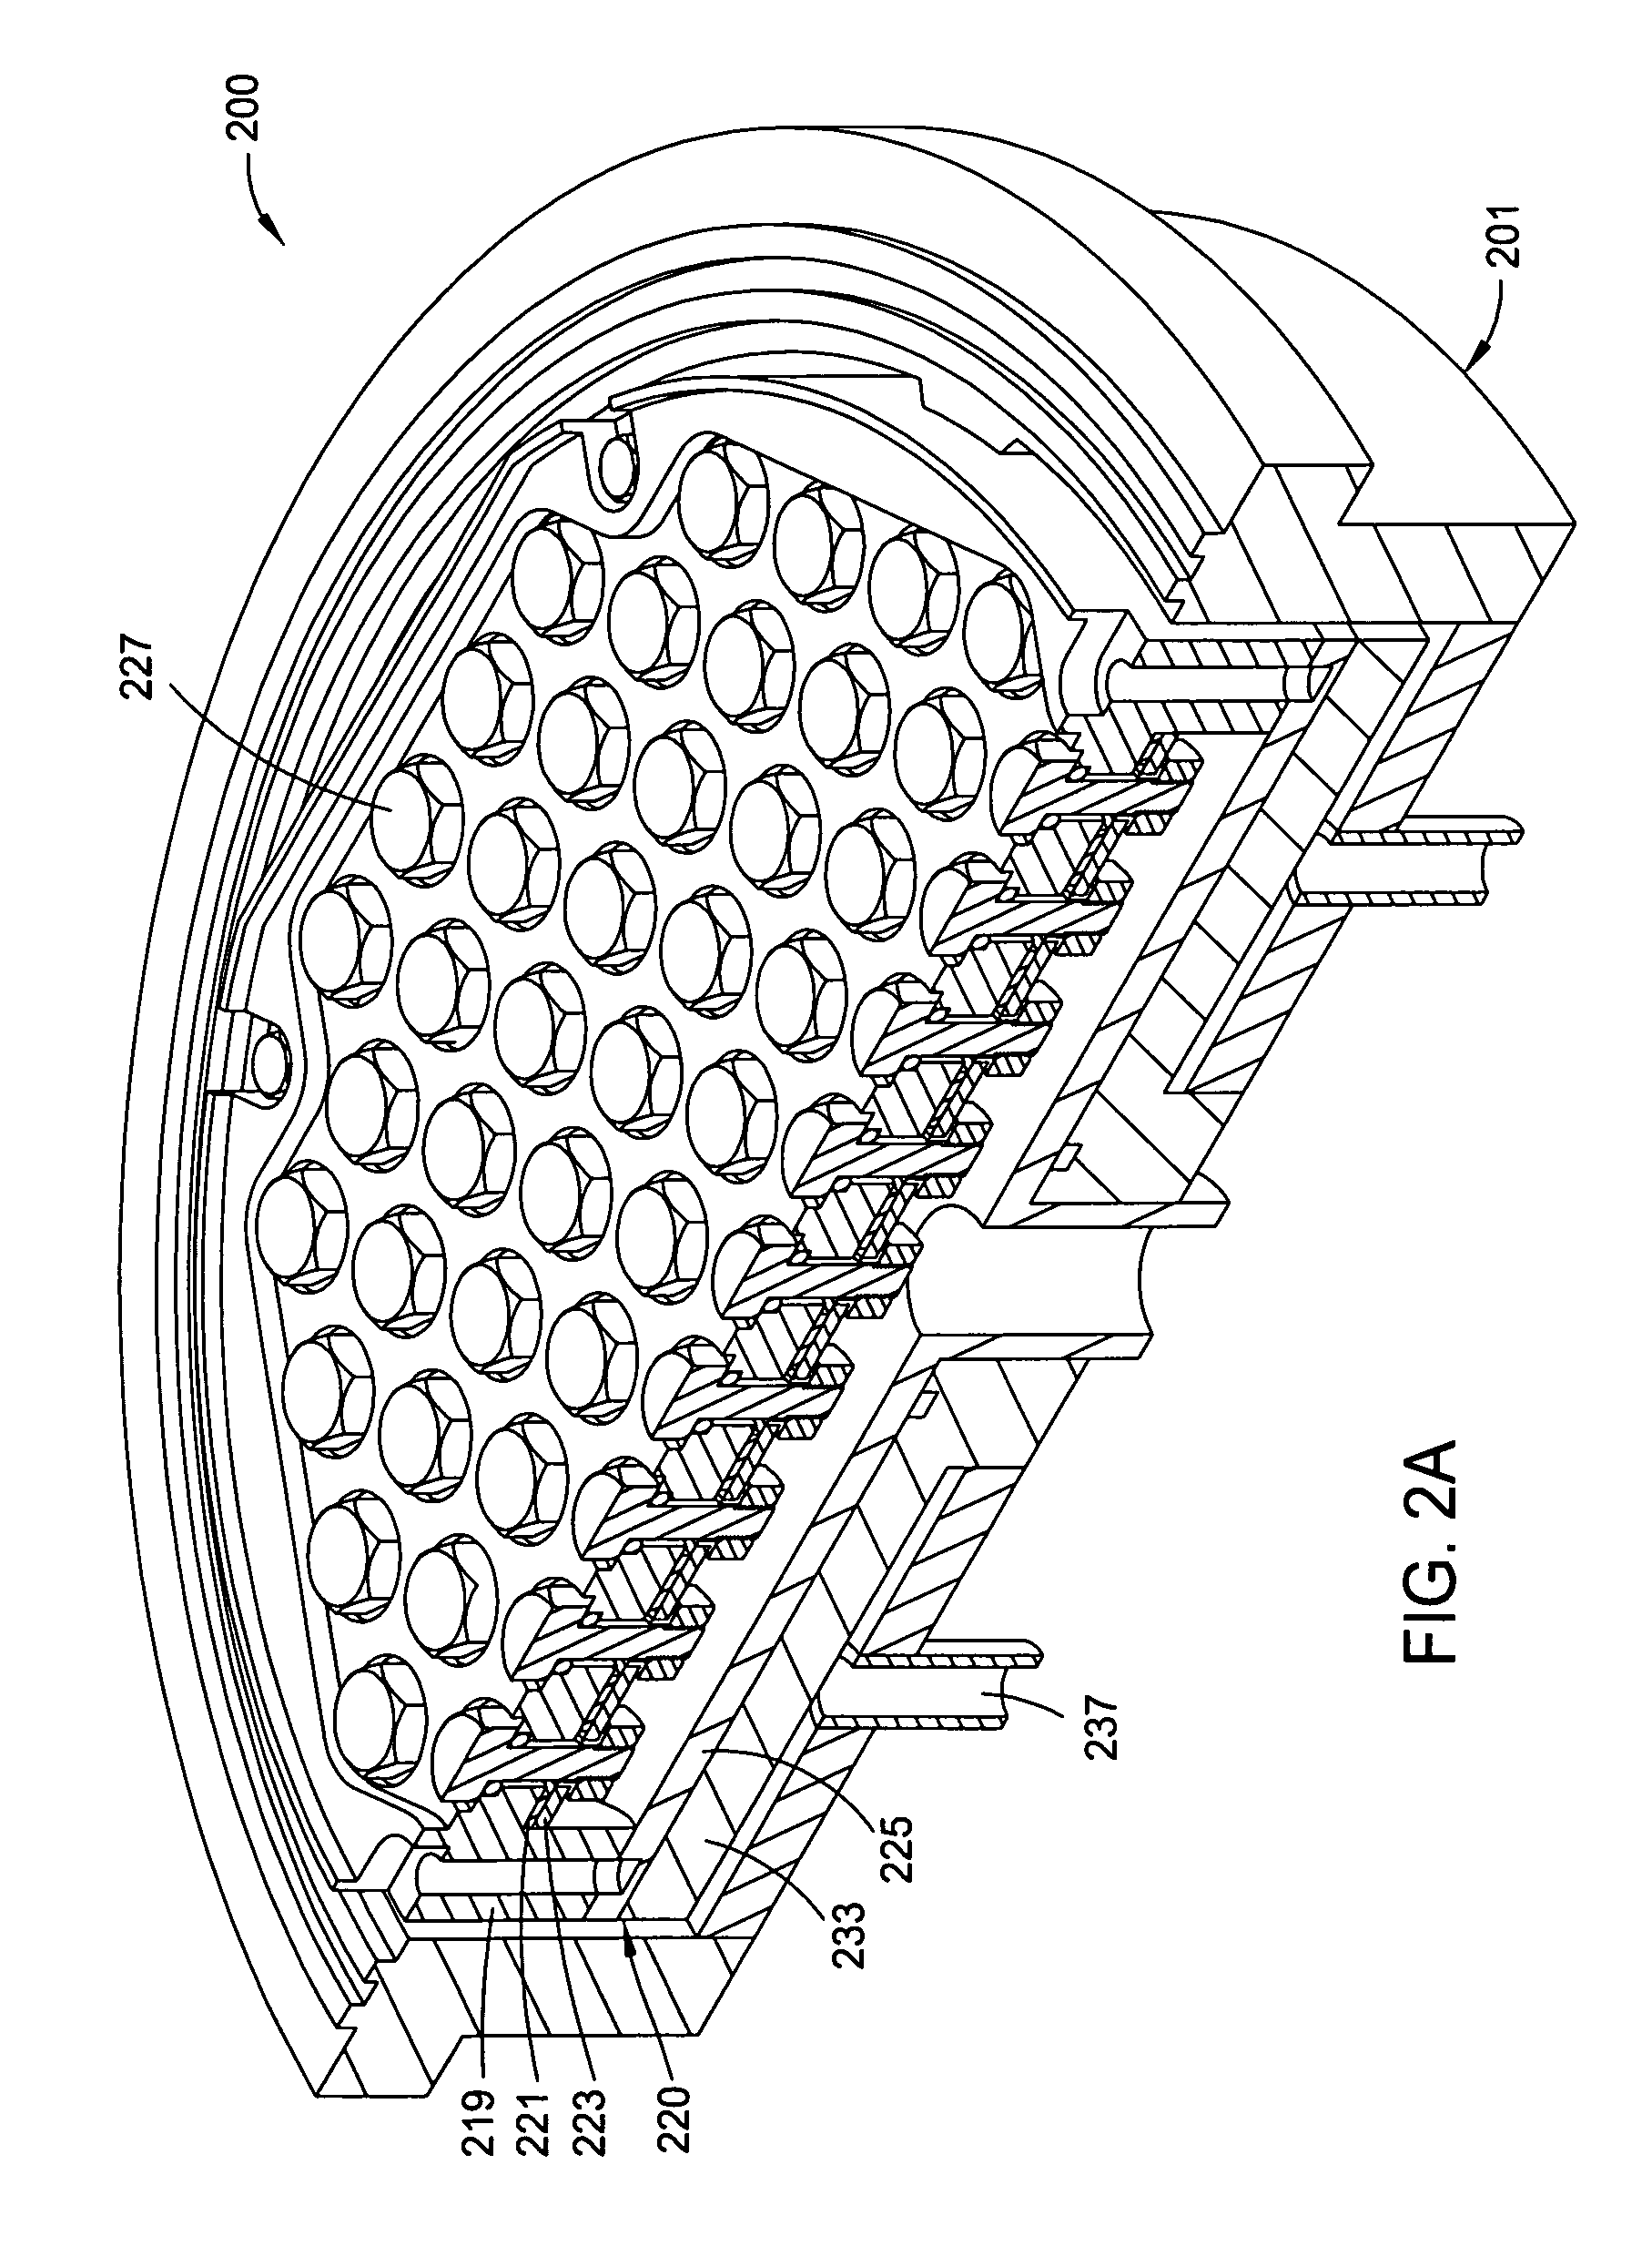 Electroplating apparatus based on an array of anodes